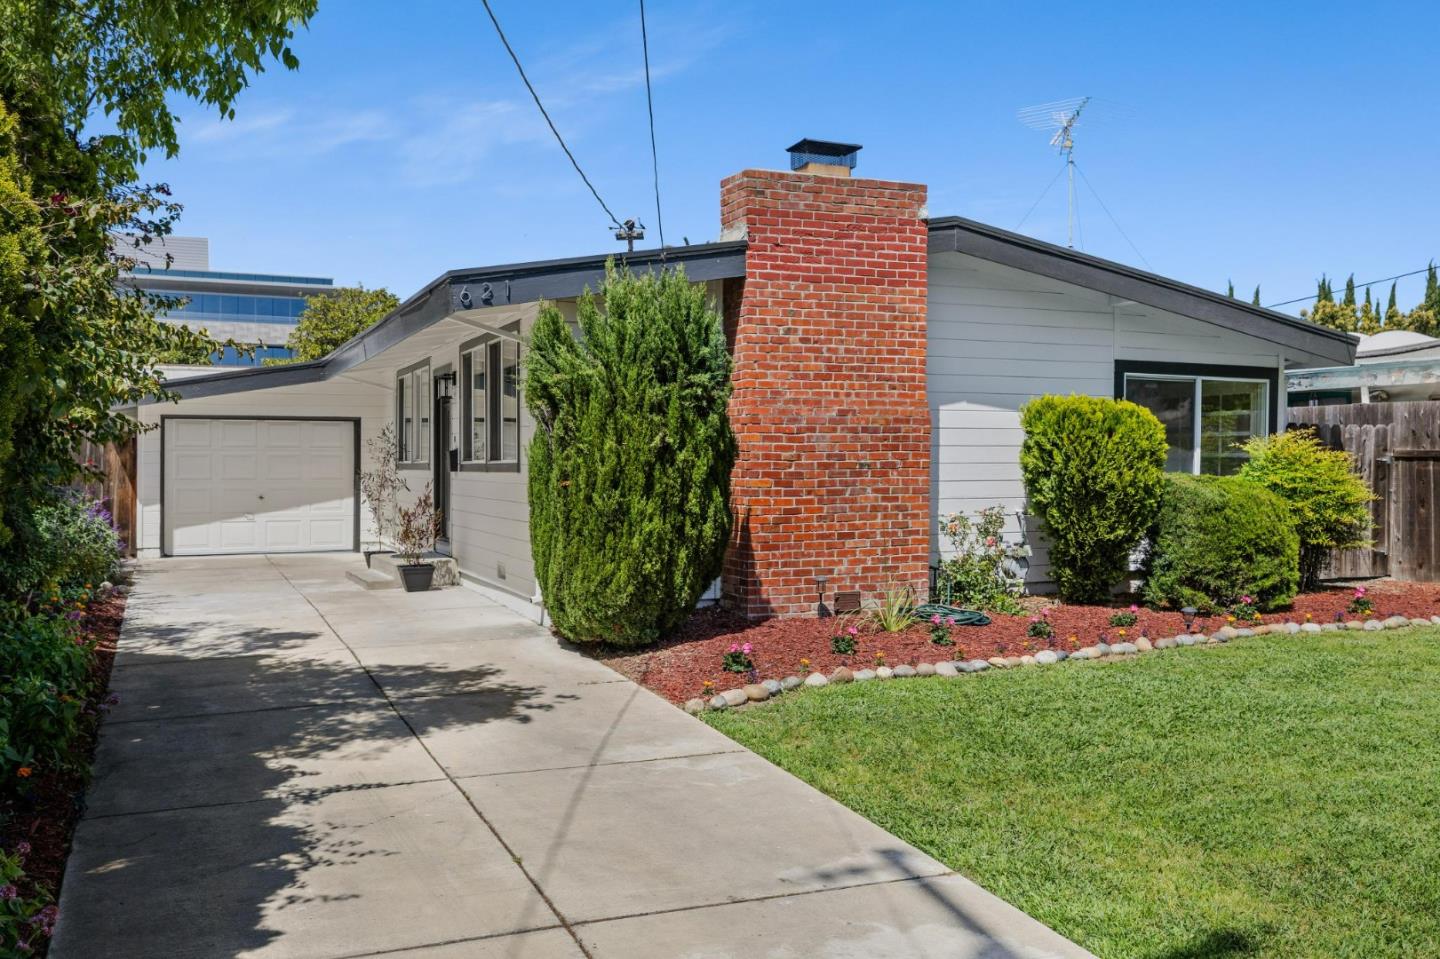 Photo of 621 Pine Ave in Sunnyvale, CA